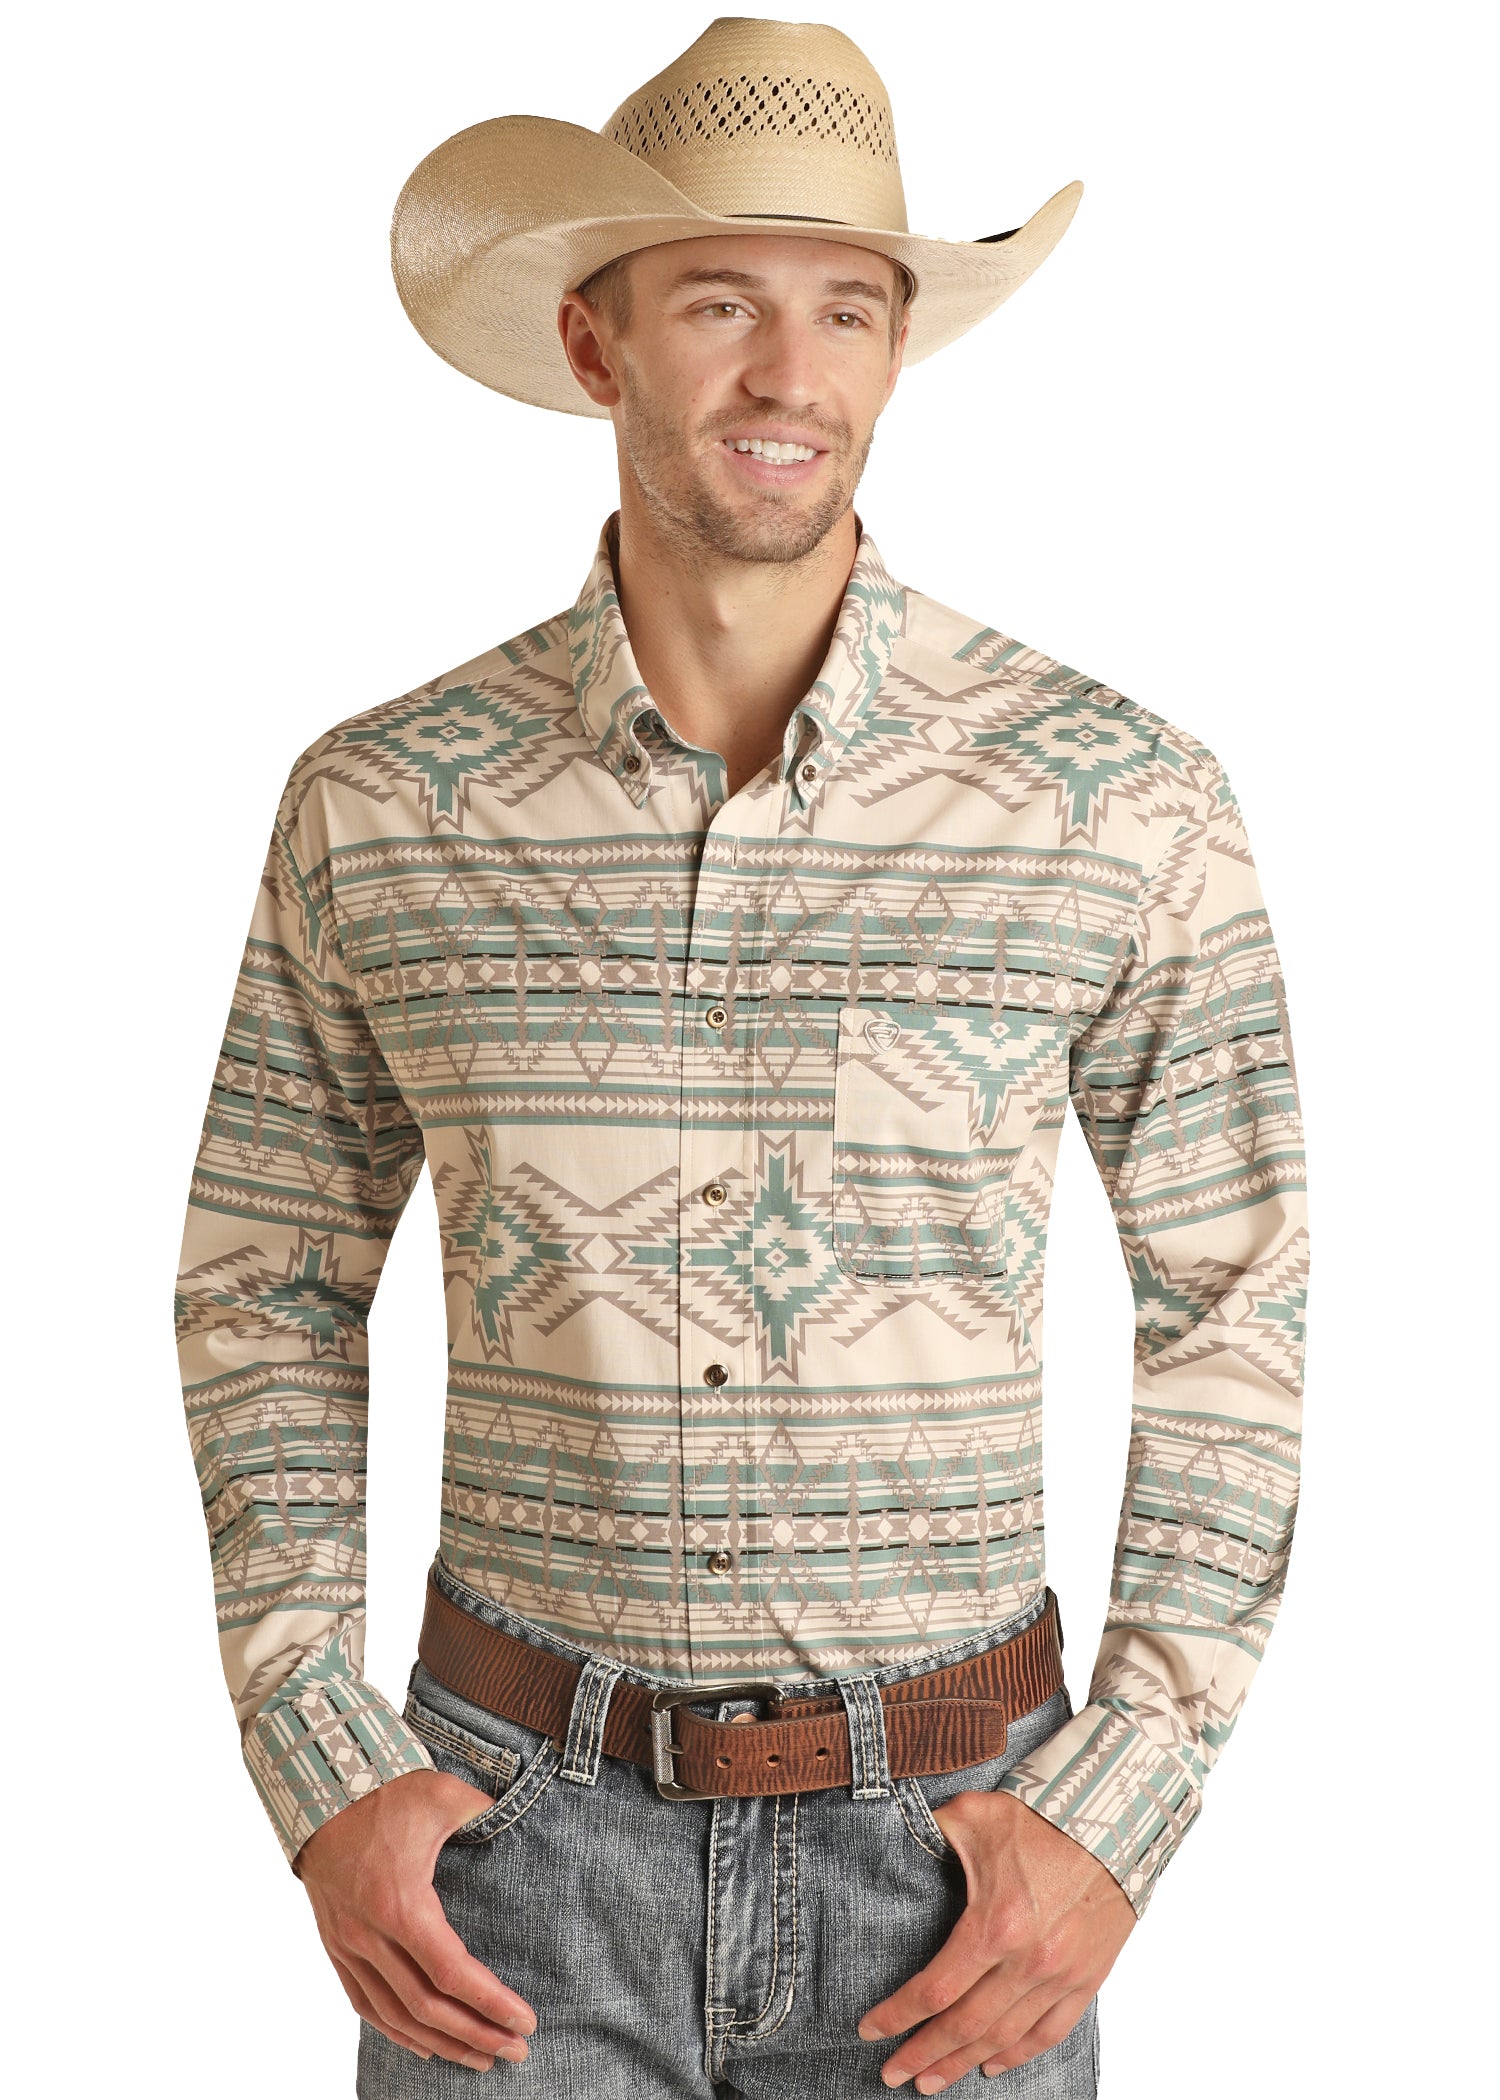 'Panhandle-Rock & Roll' Men's Aztec Western Woven Button Down - Teal